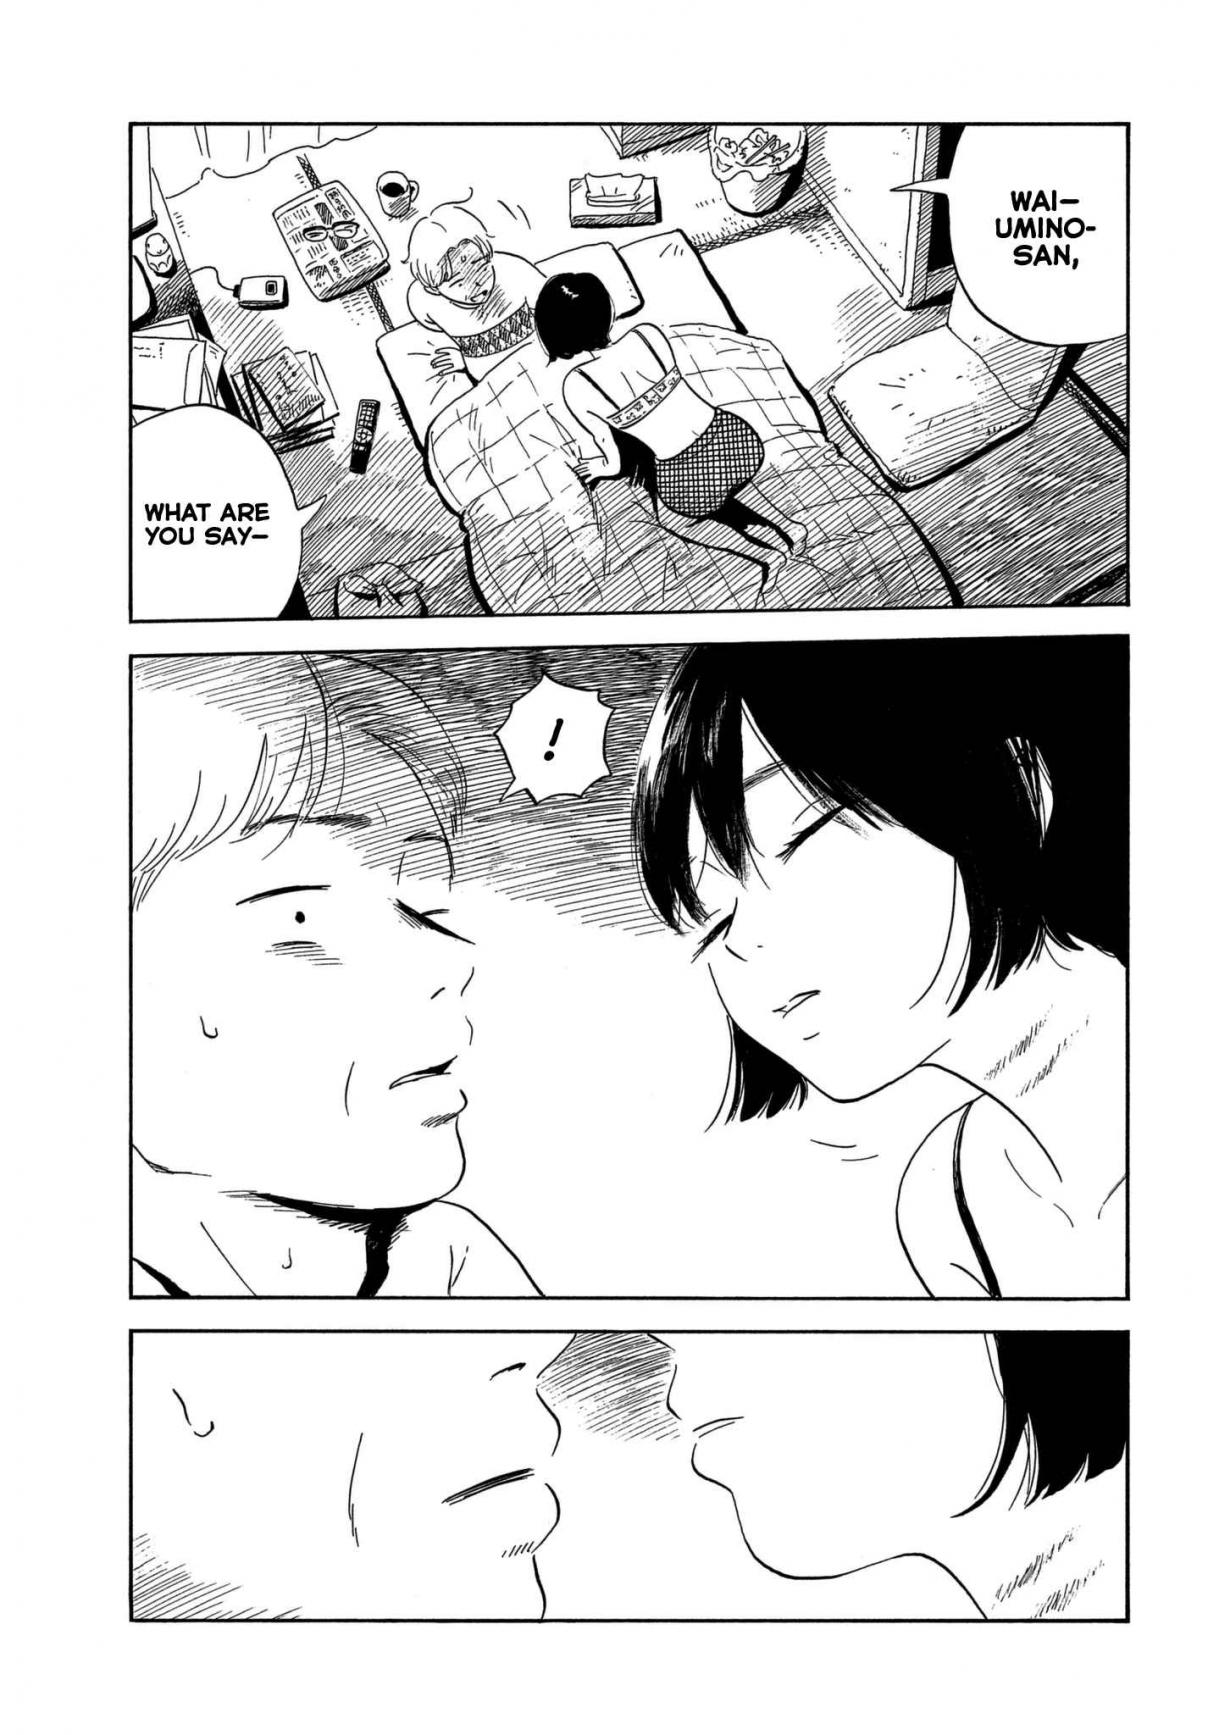 The Stray and the Weeds Vol. 2 Ch. 8